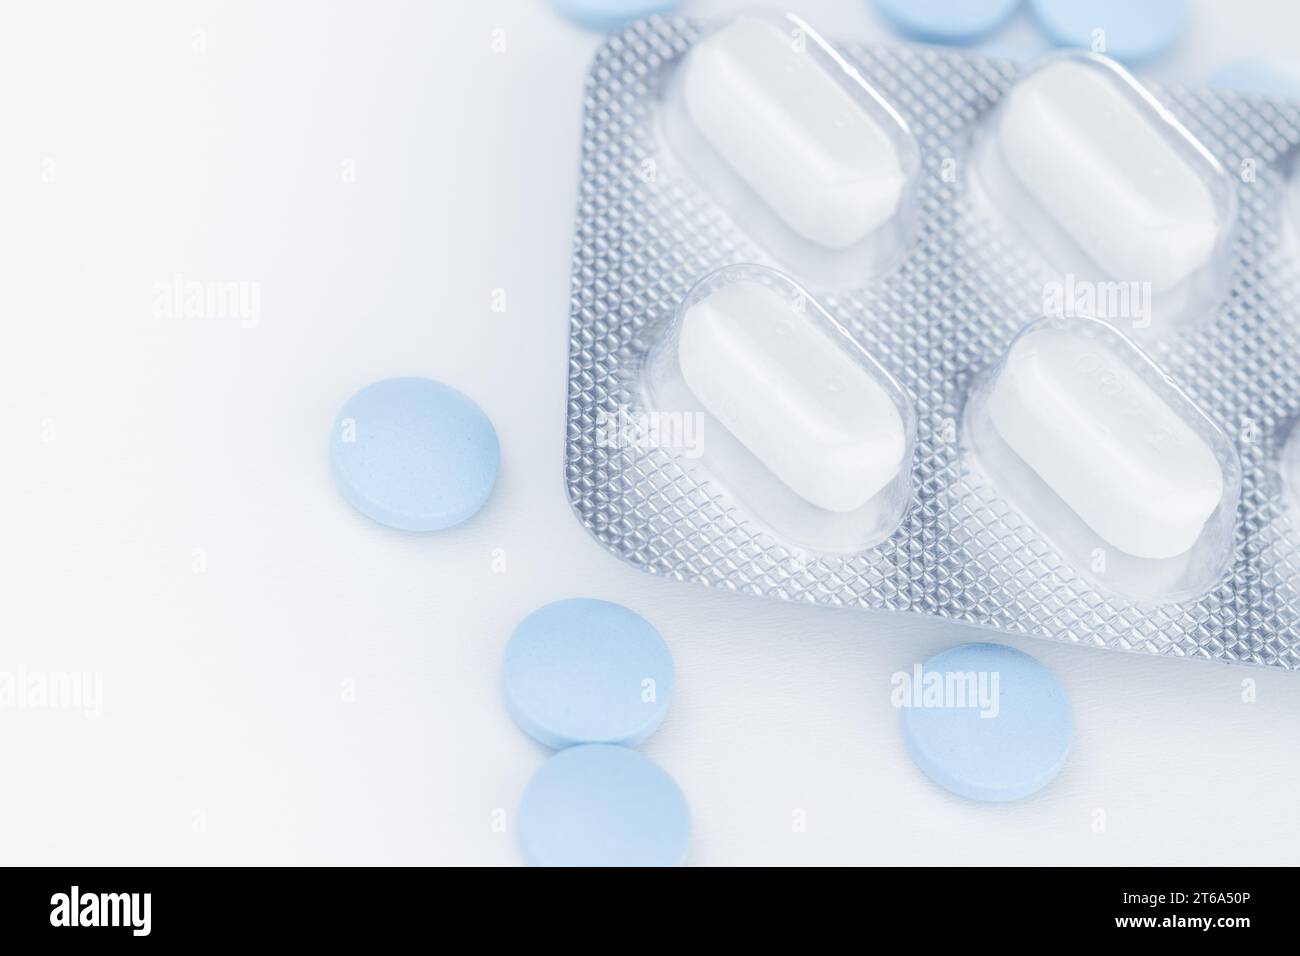 White blister pack pills, pharmaceutical product, many blue pills separately on a white background, close-up and selective focus. Stock Photo